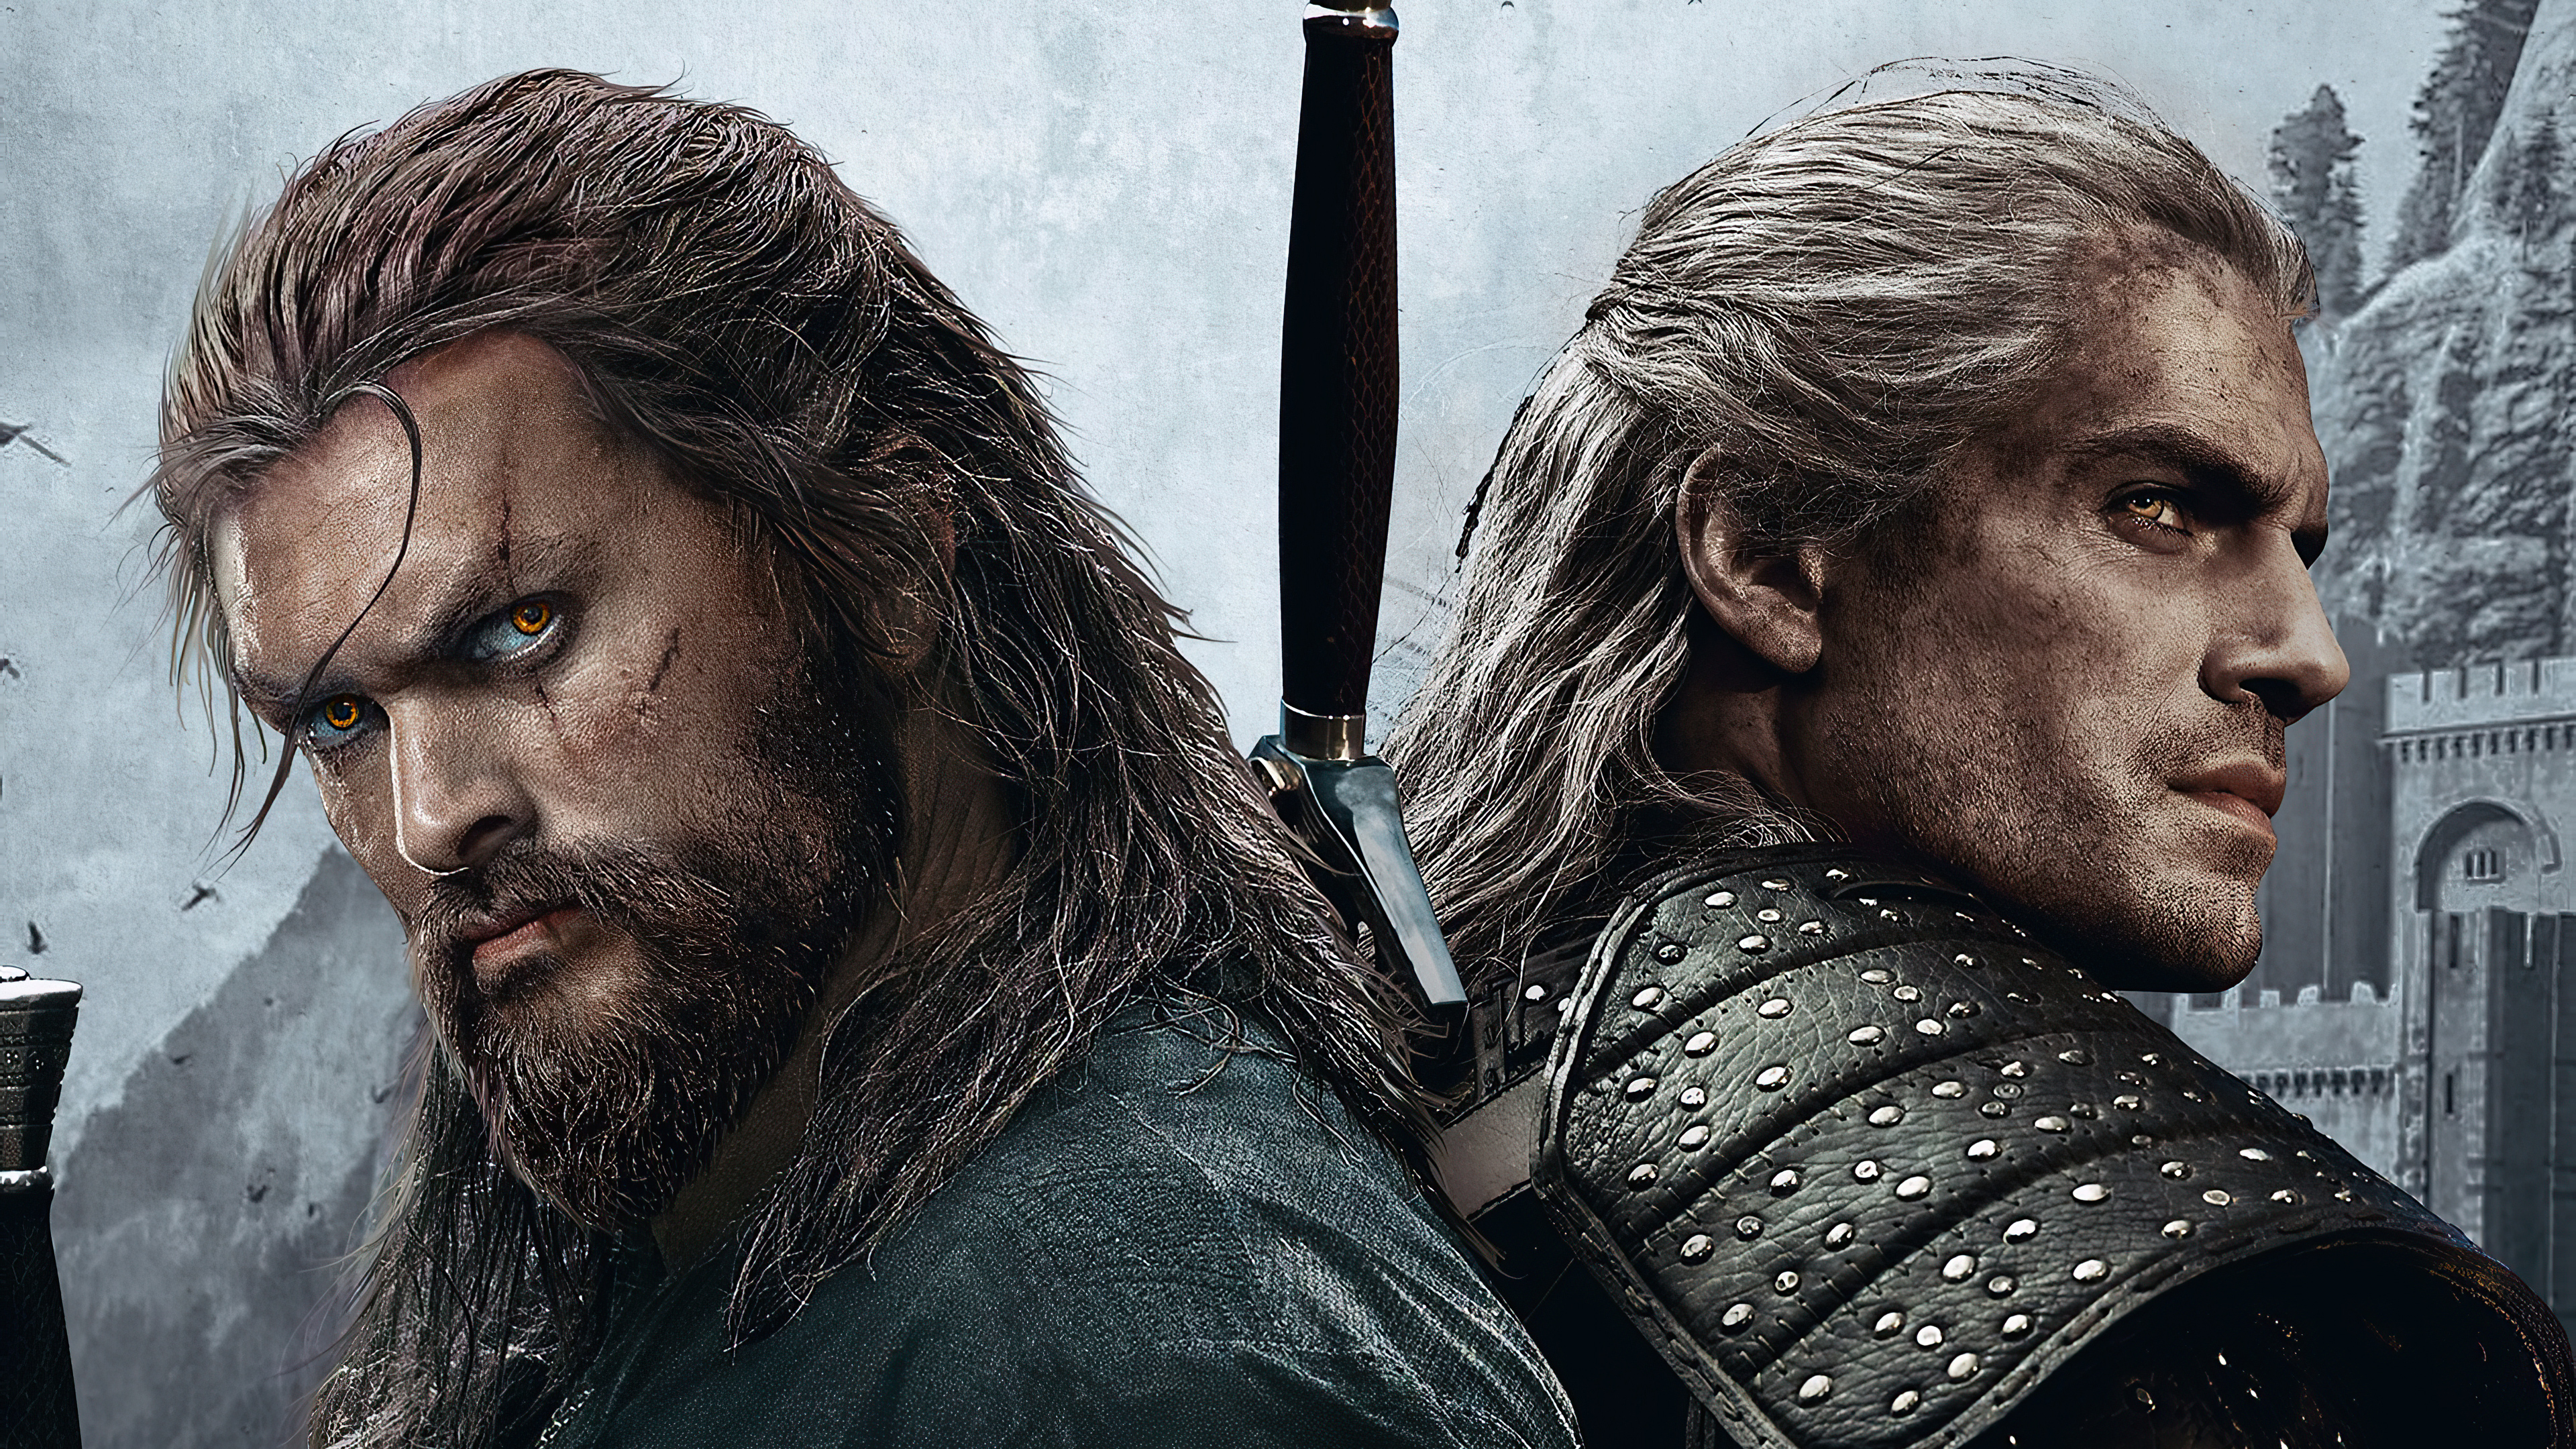 Jason And Henry Cavill In Witcher, HD Tv Shows, 4k Wallpapers, Images,  Backgrounds, Photos and Pictures